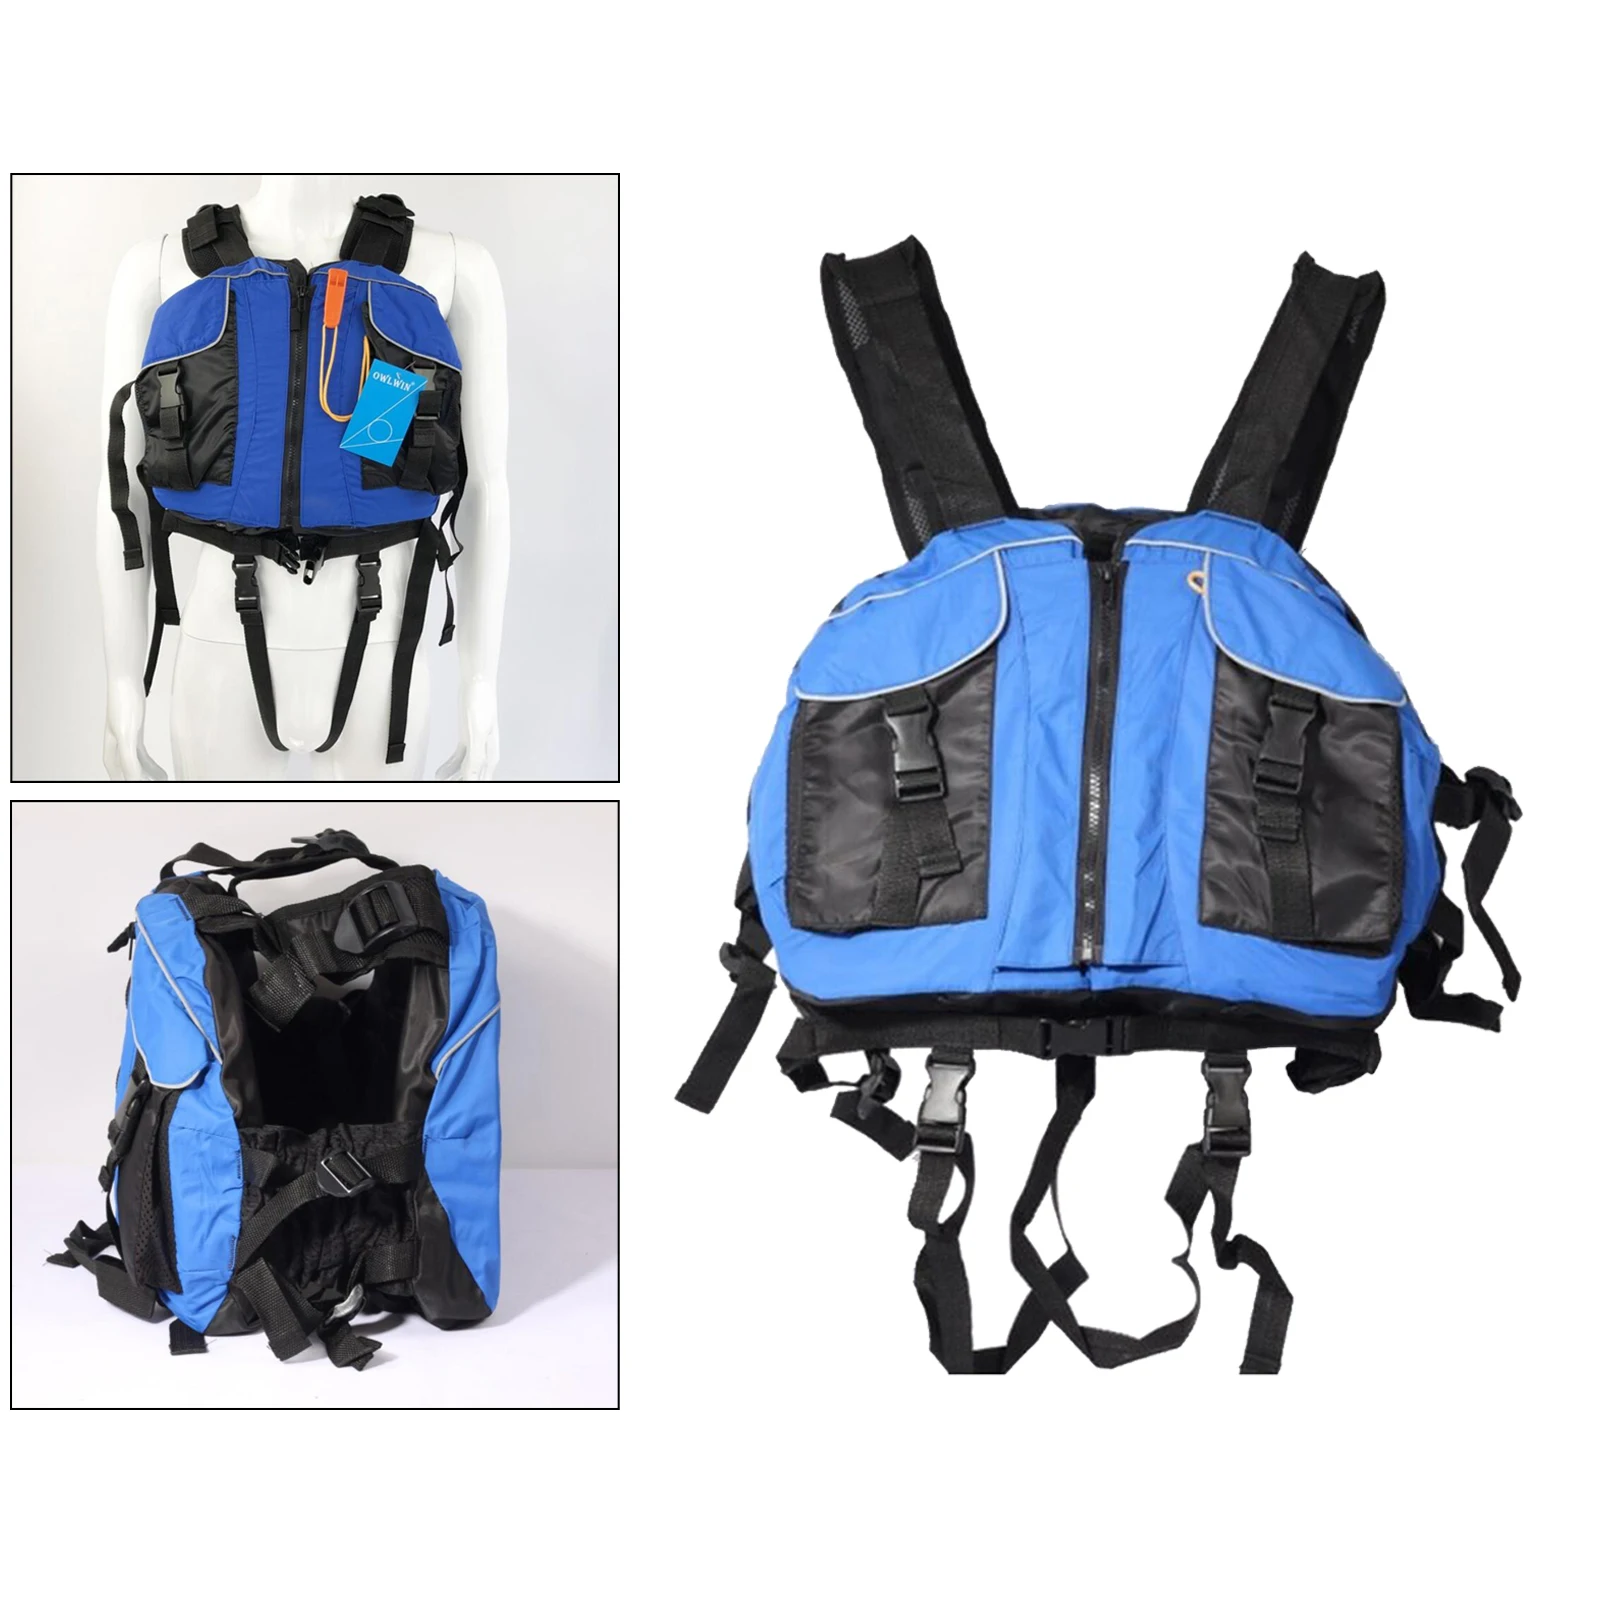 Breathable Life Jacket Life Vest Aid Watersport Personal Floatation Device